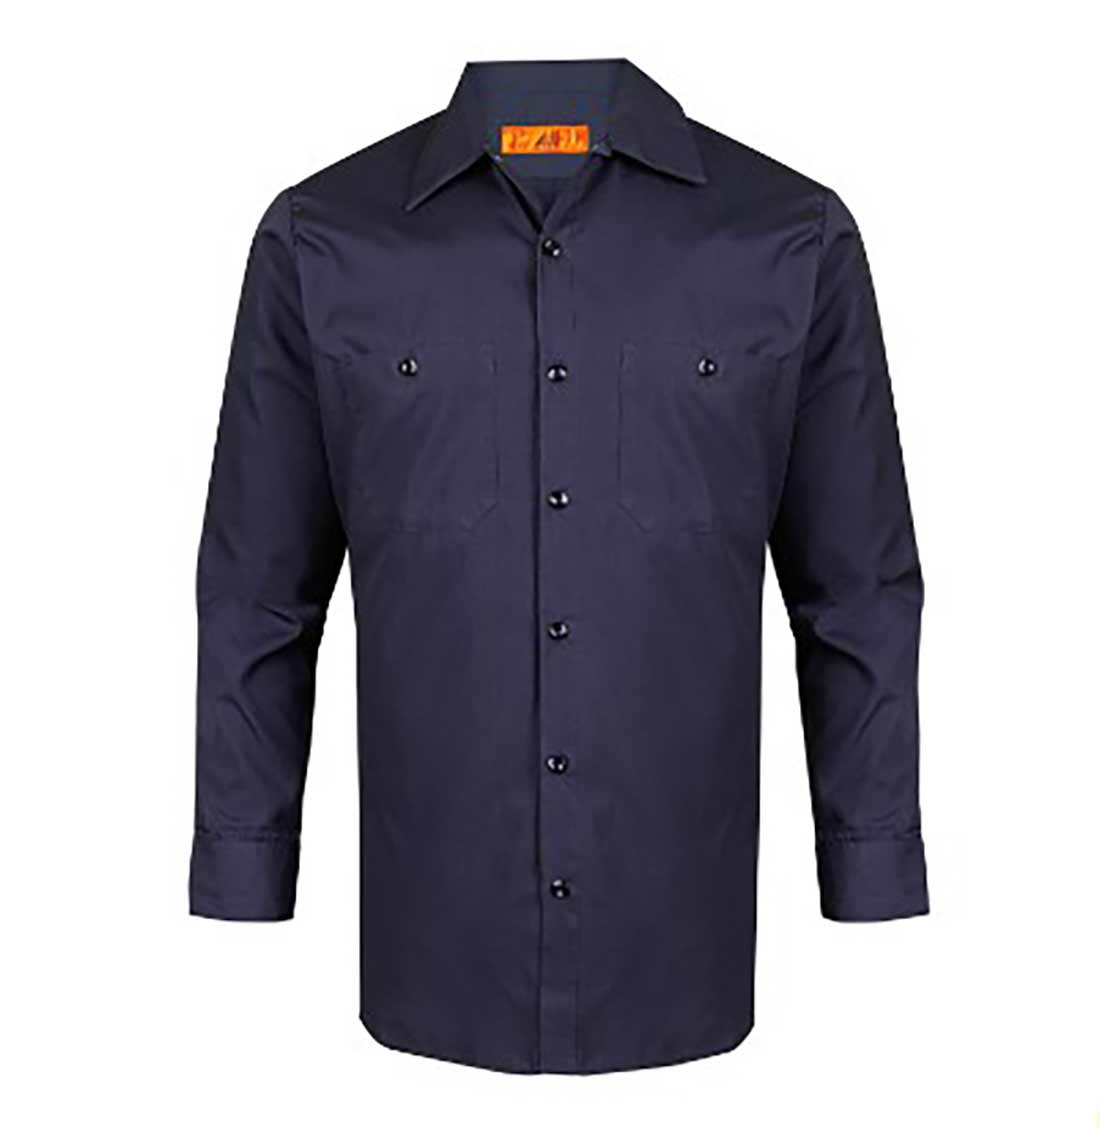 American Dawn | 2X-Large Navy Blue Work Shirt With Long Sleeves And 2 Pockets